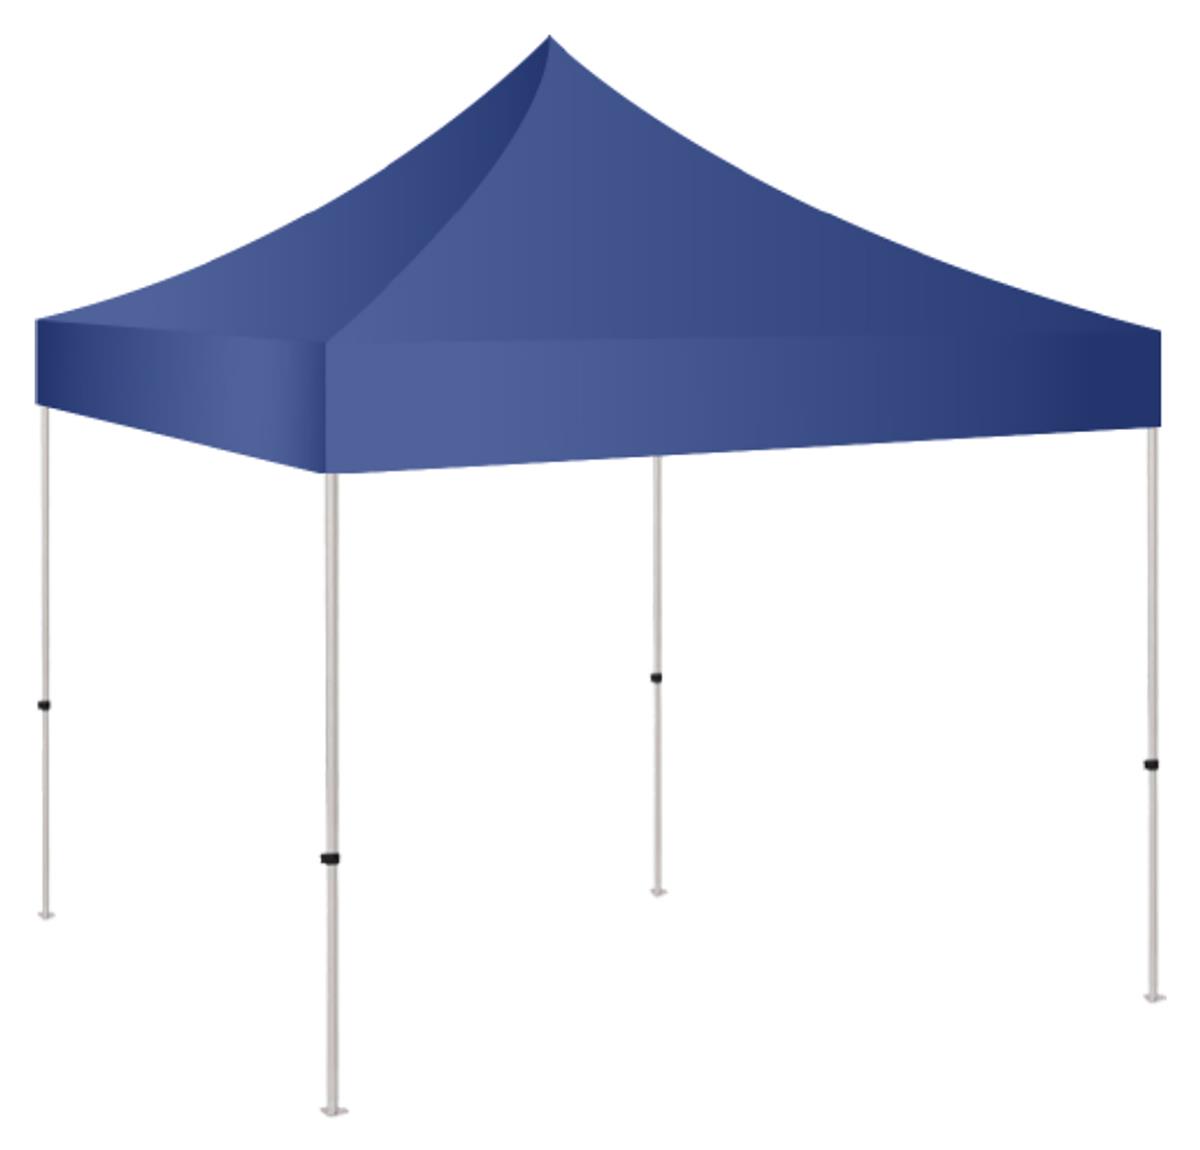 5x5 pop up canopy with four anchoring stakes for stability 